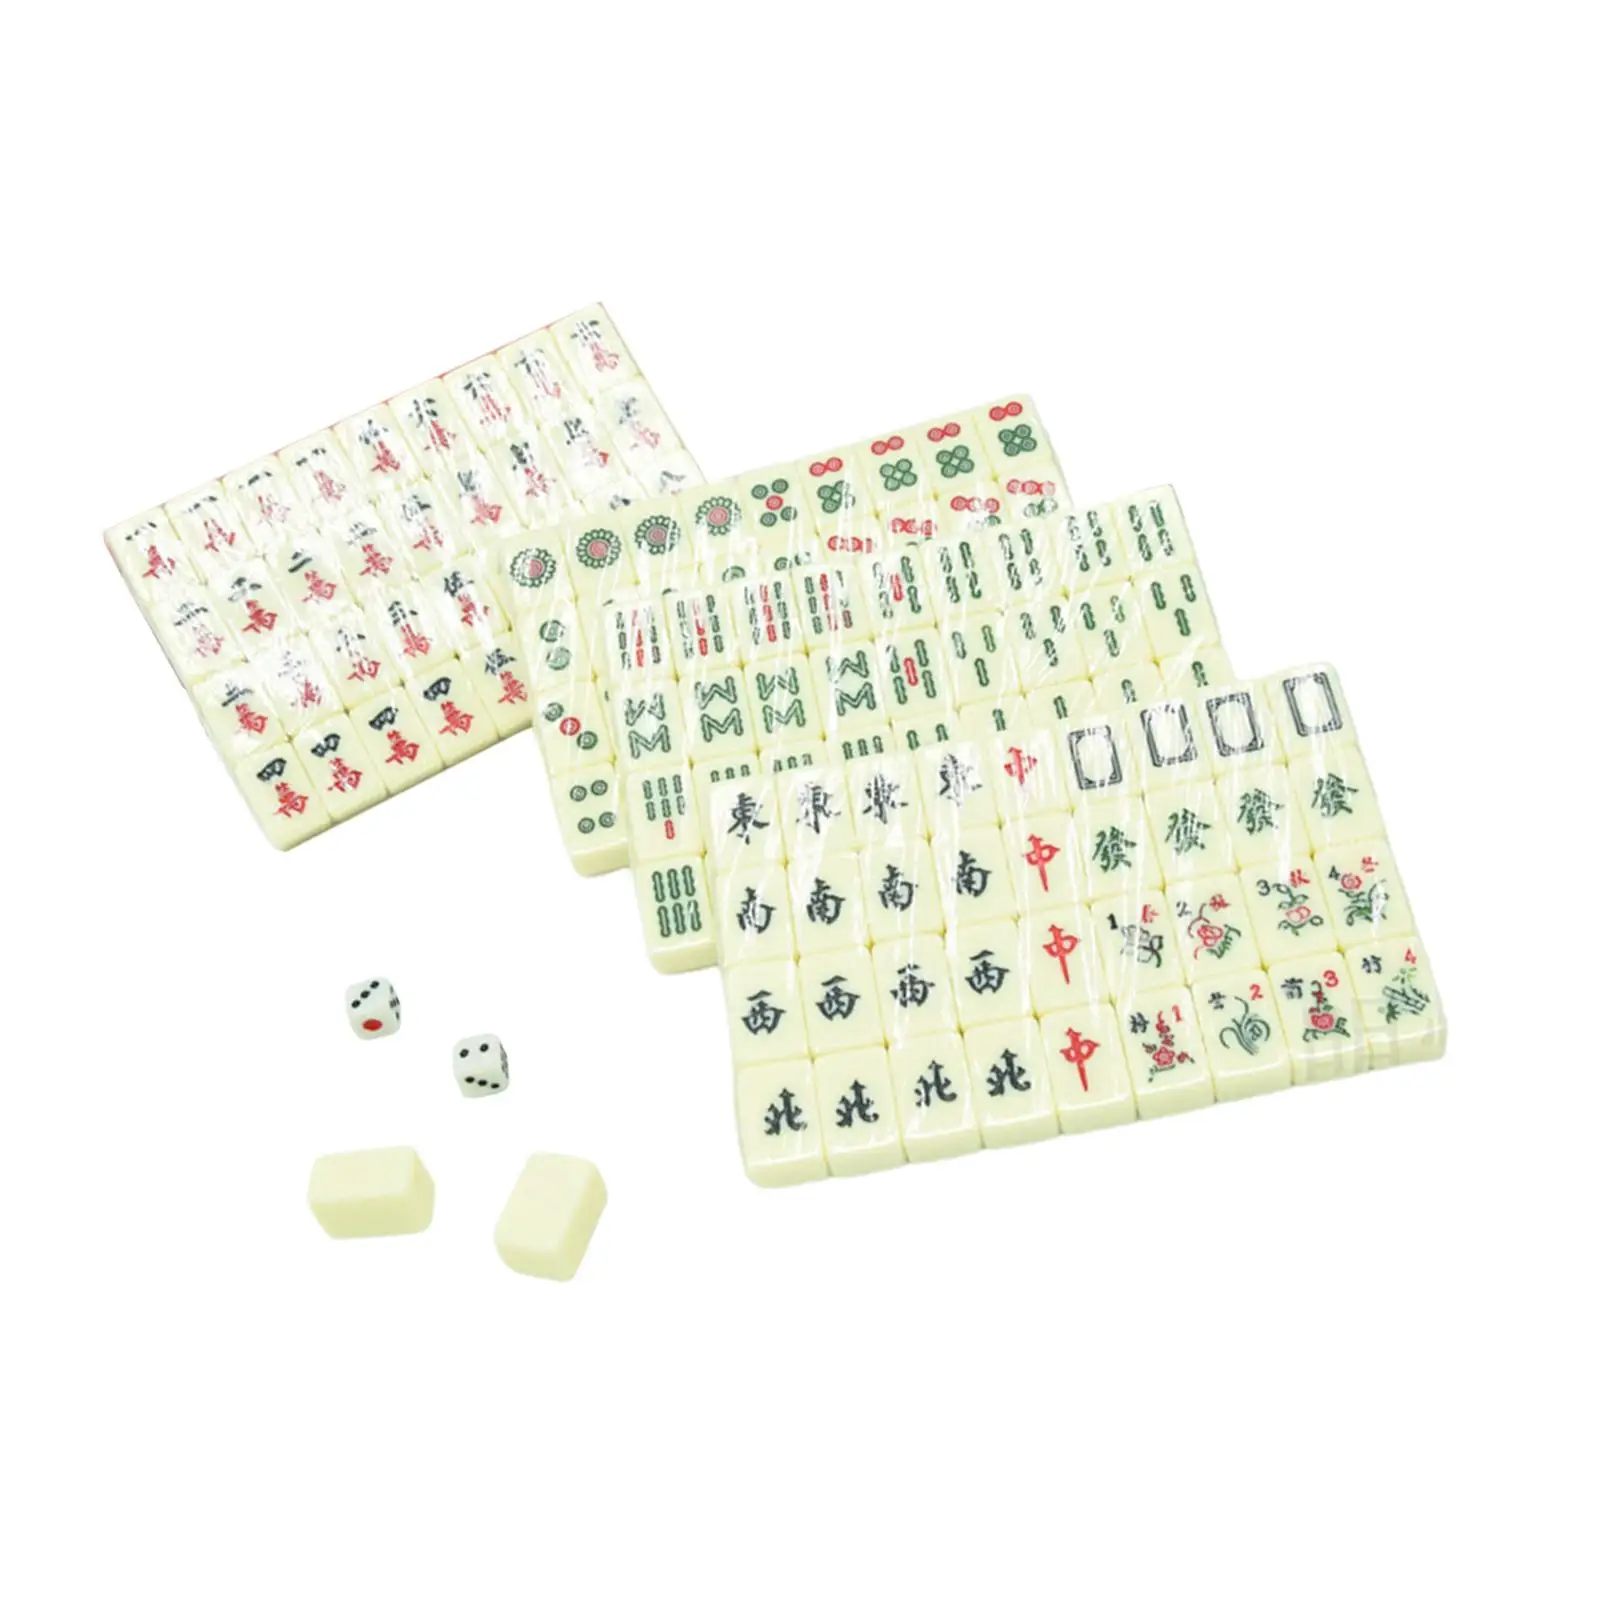 Chinese Mini Mahjong Small Tiles Lightweight Mahjong Gifts Mahjong Game Set Travel Mahjong Set for Family Leisure Party Picnic